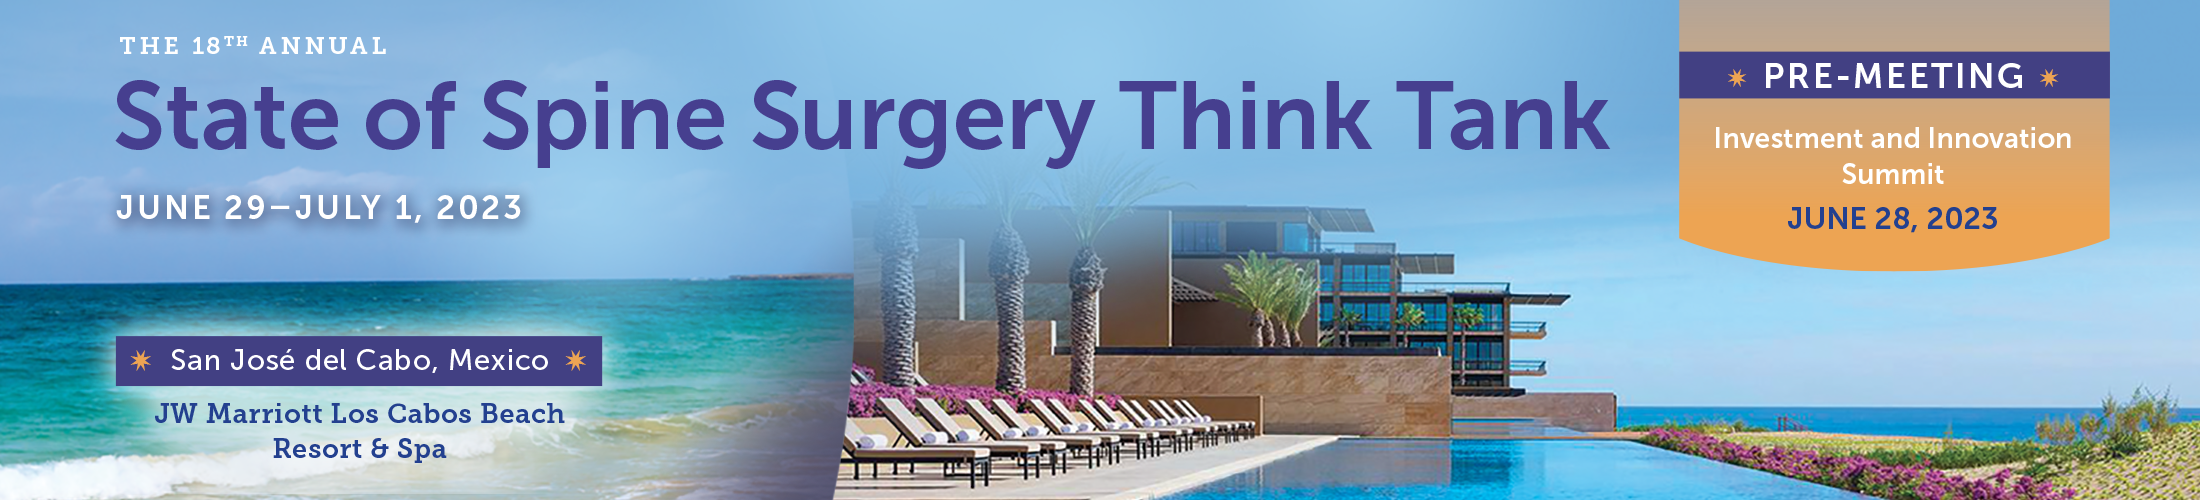 State of Spine Surgery Think Tank 2023